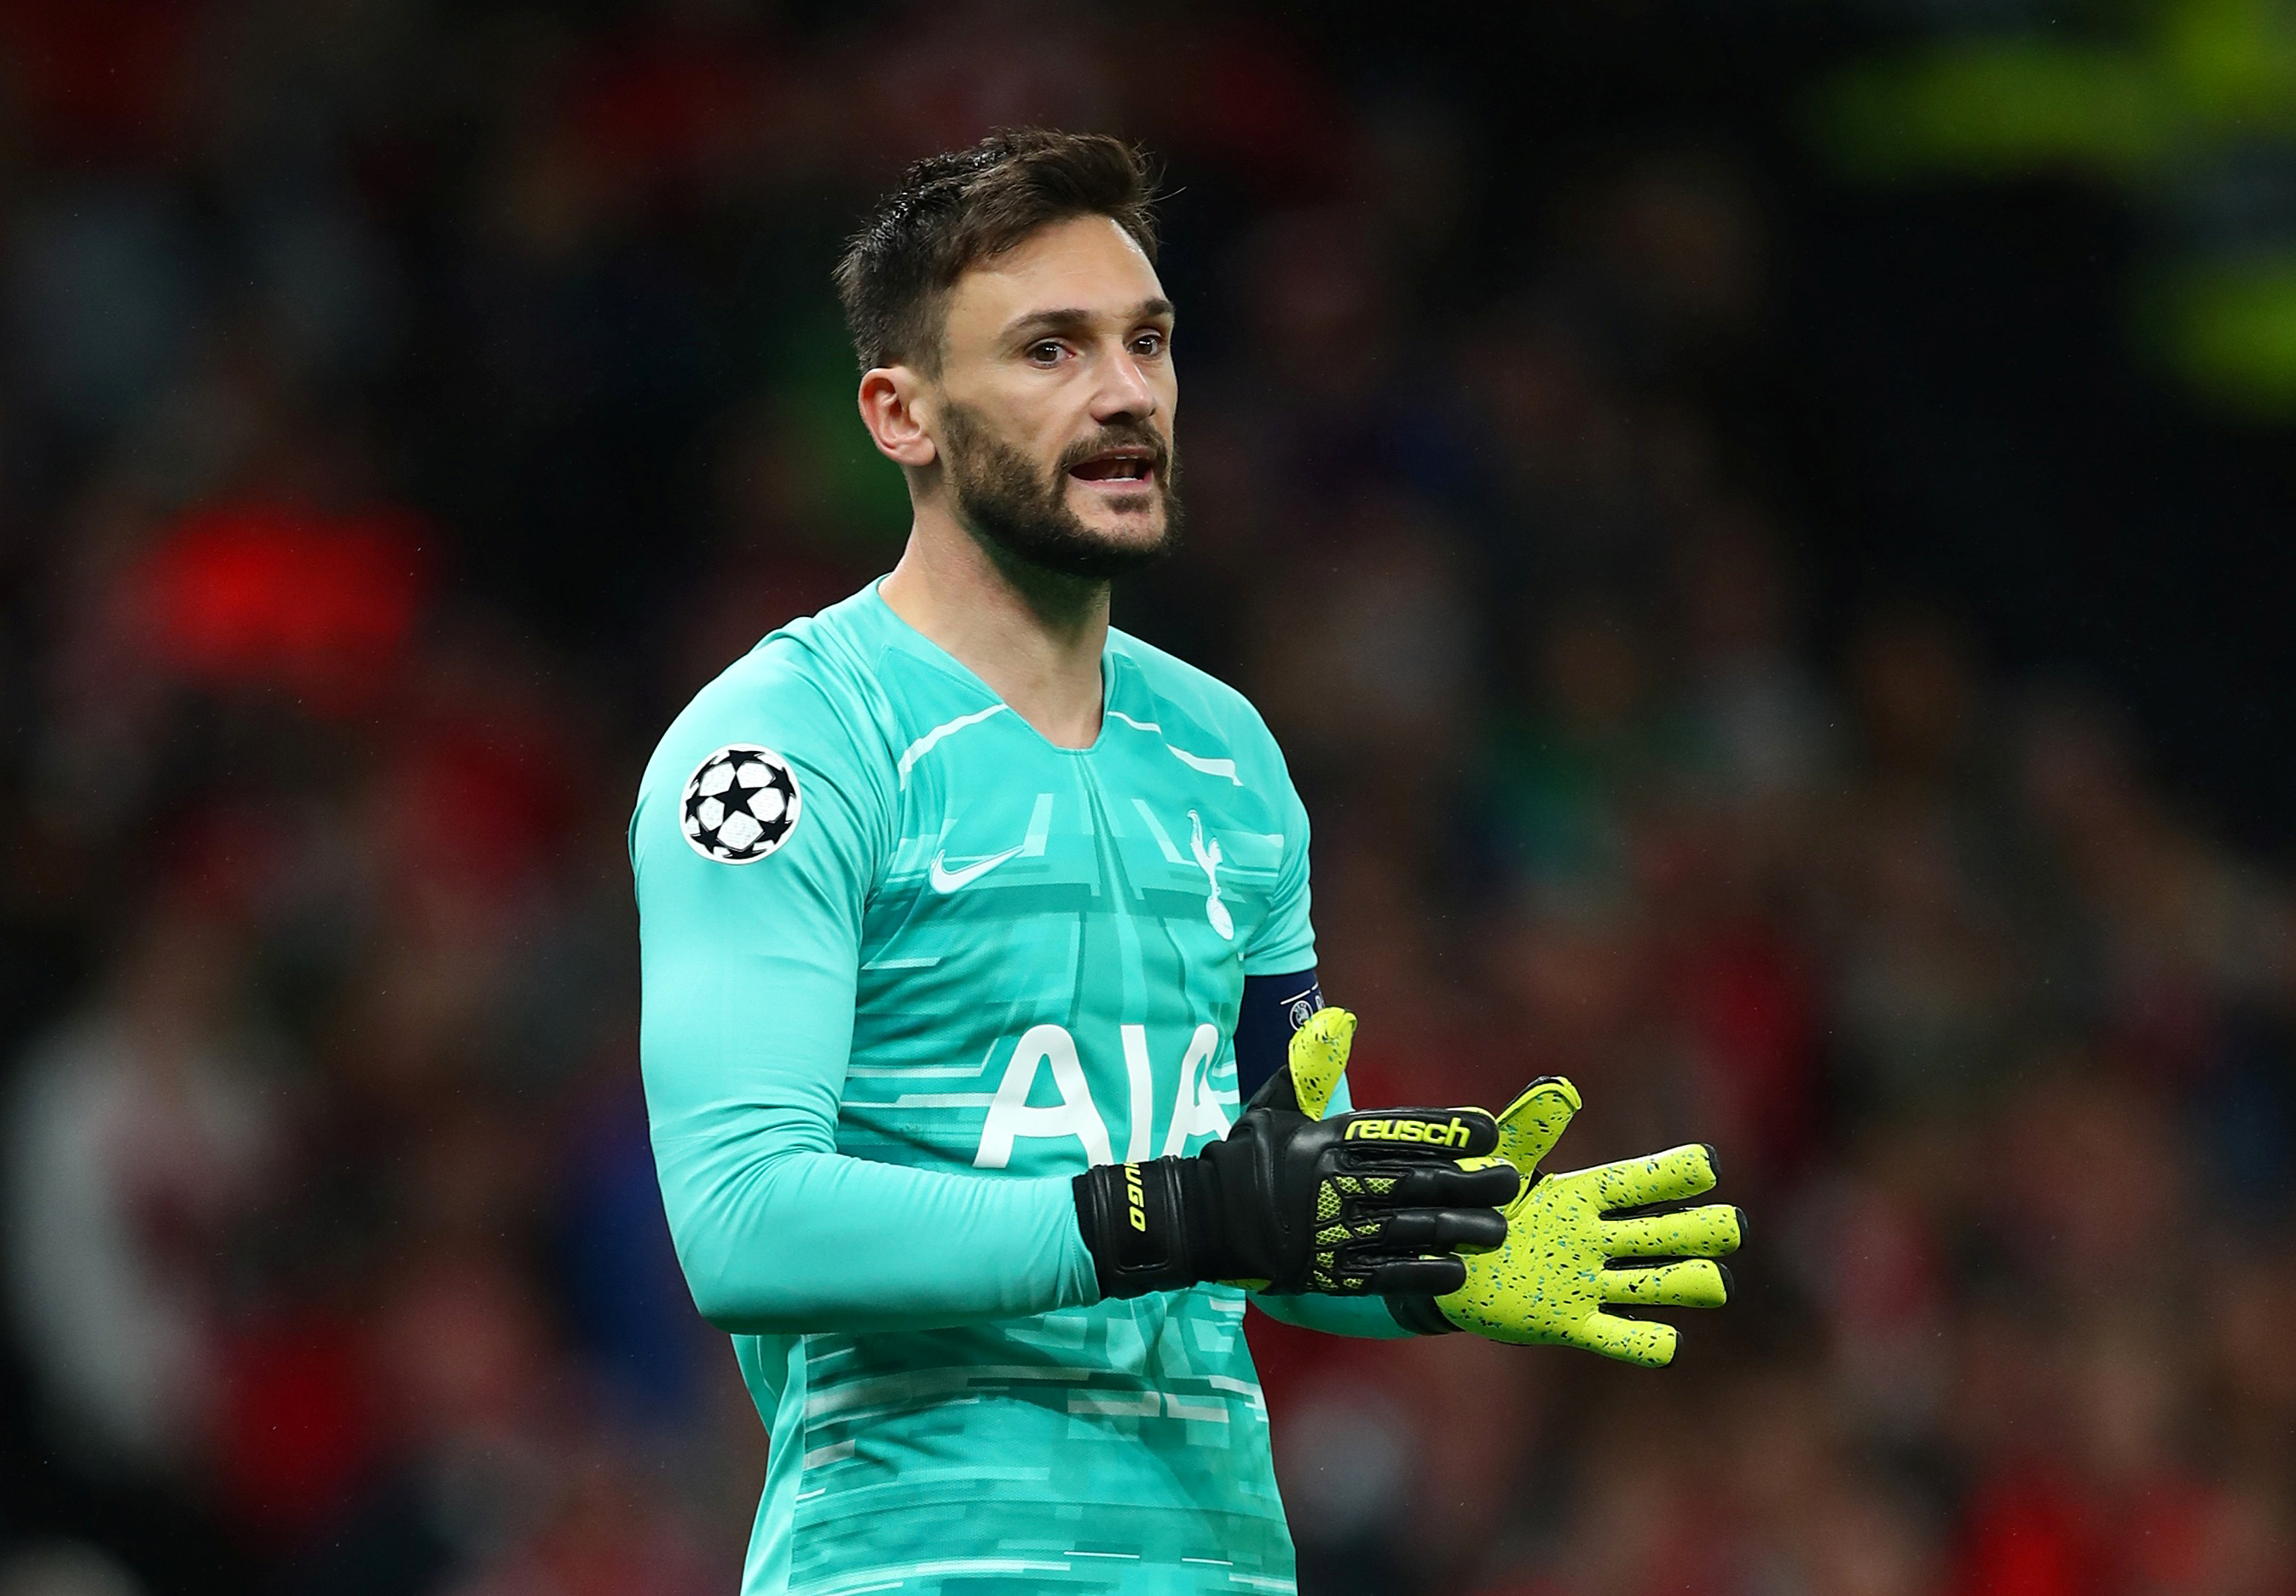 World Cup winner Hugo Lloris ruled out of action for rest of 2019